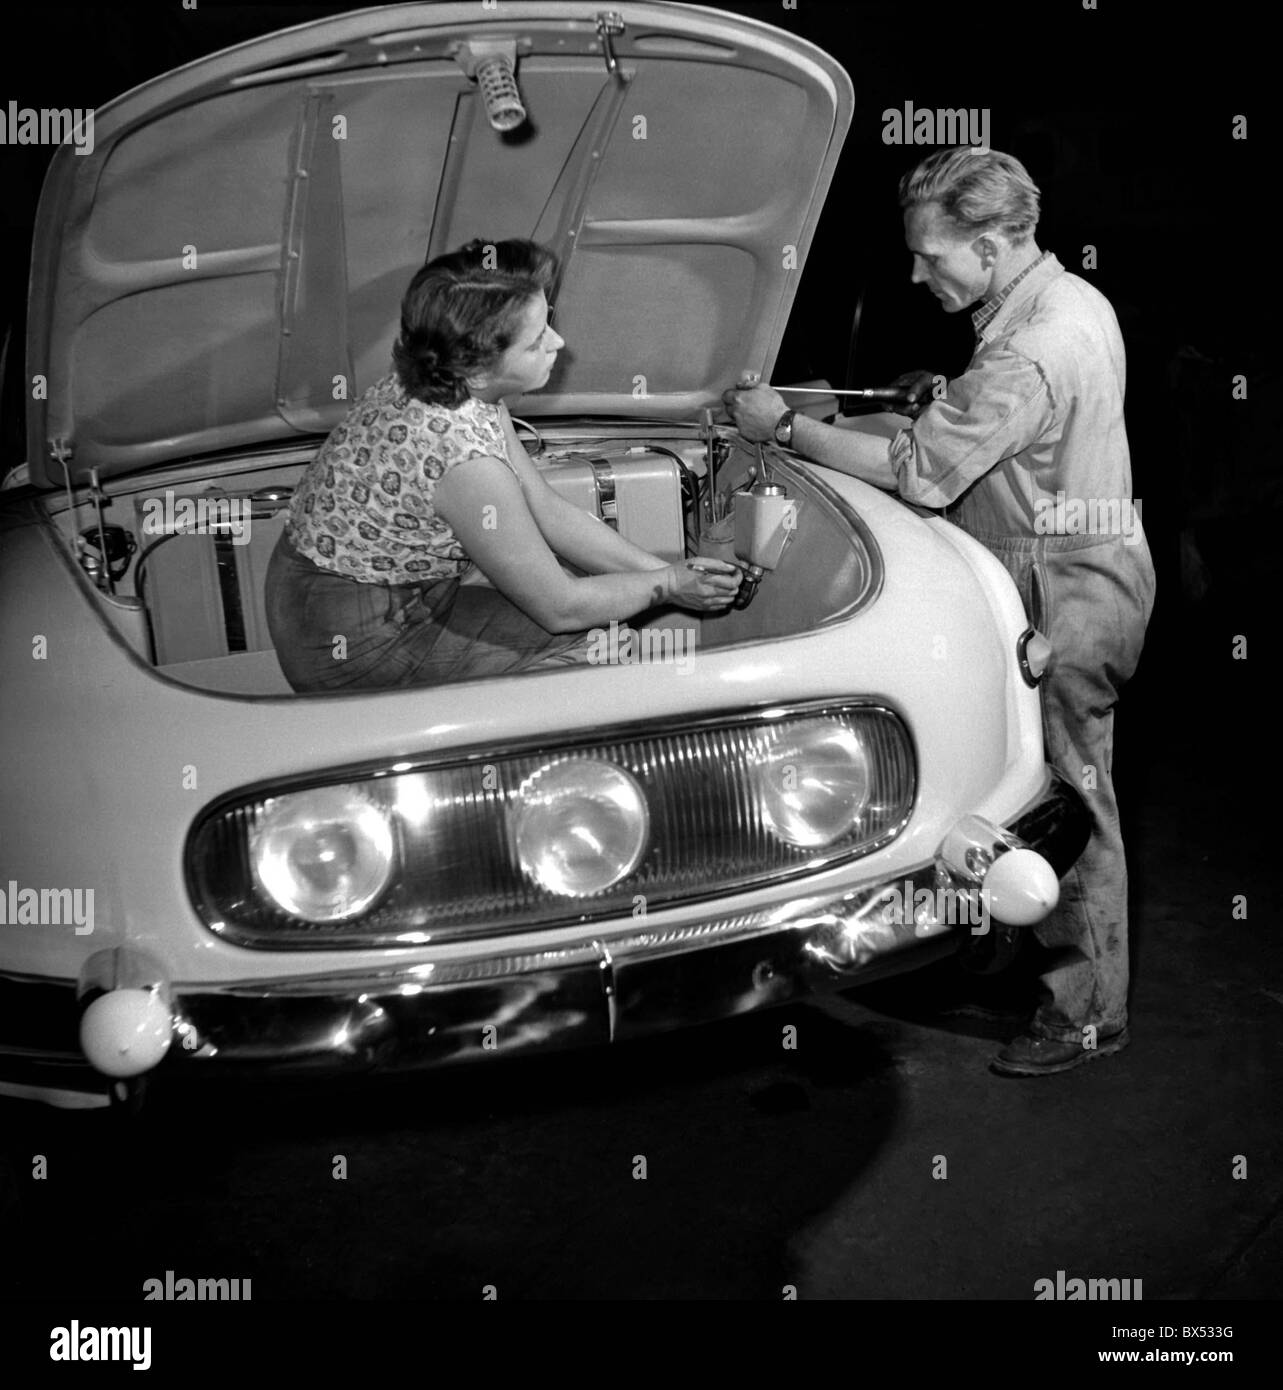 Oldrich Bittner right and Marie Horakova left are giving last touches to Tatra 603 in the Tatra assembly facility in Koprivnice Stock Photo